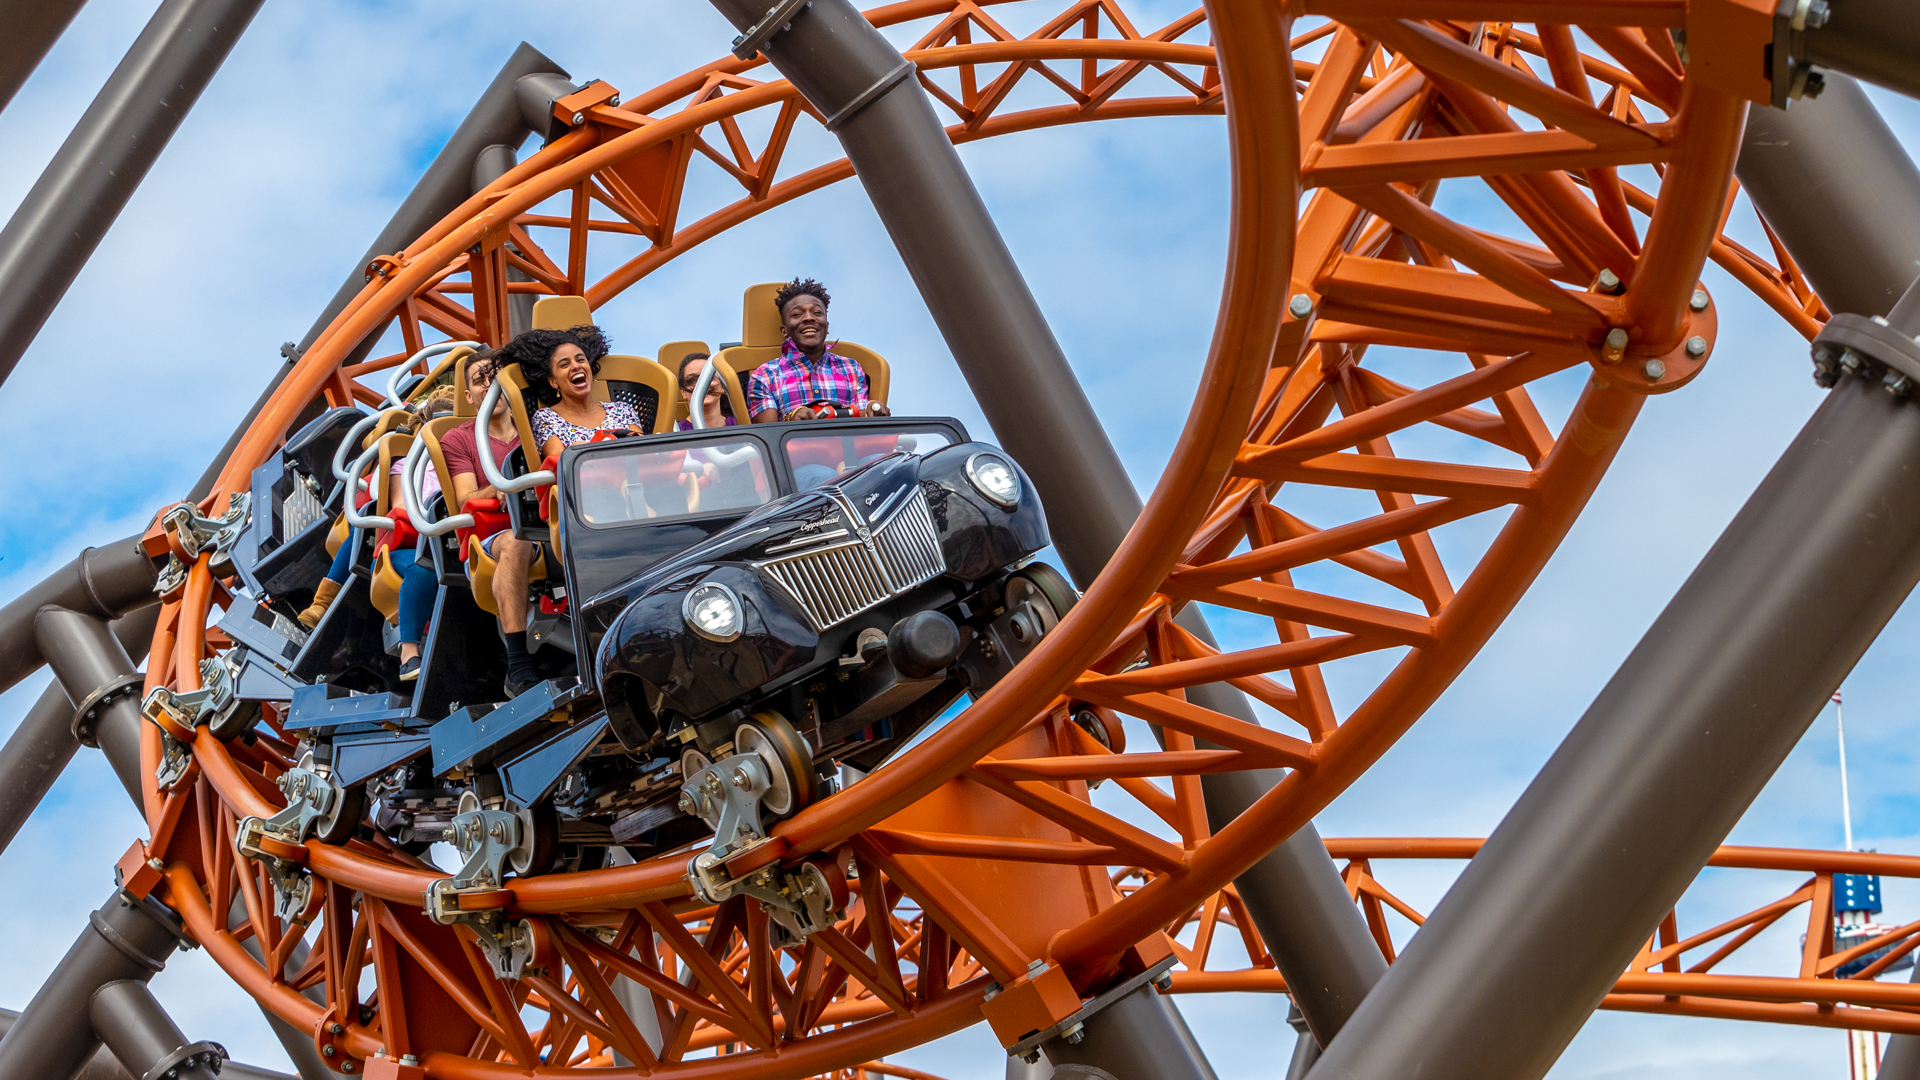 Awesome New Theme Park Rides Worth the Pricey Admission - BBVnzUk